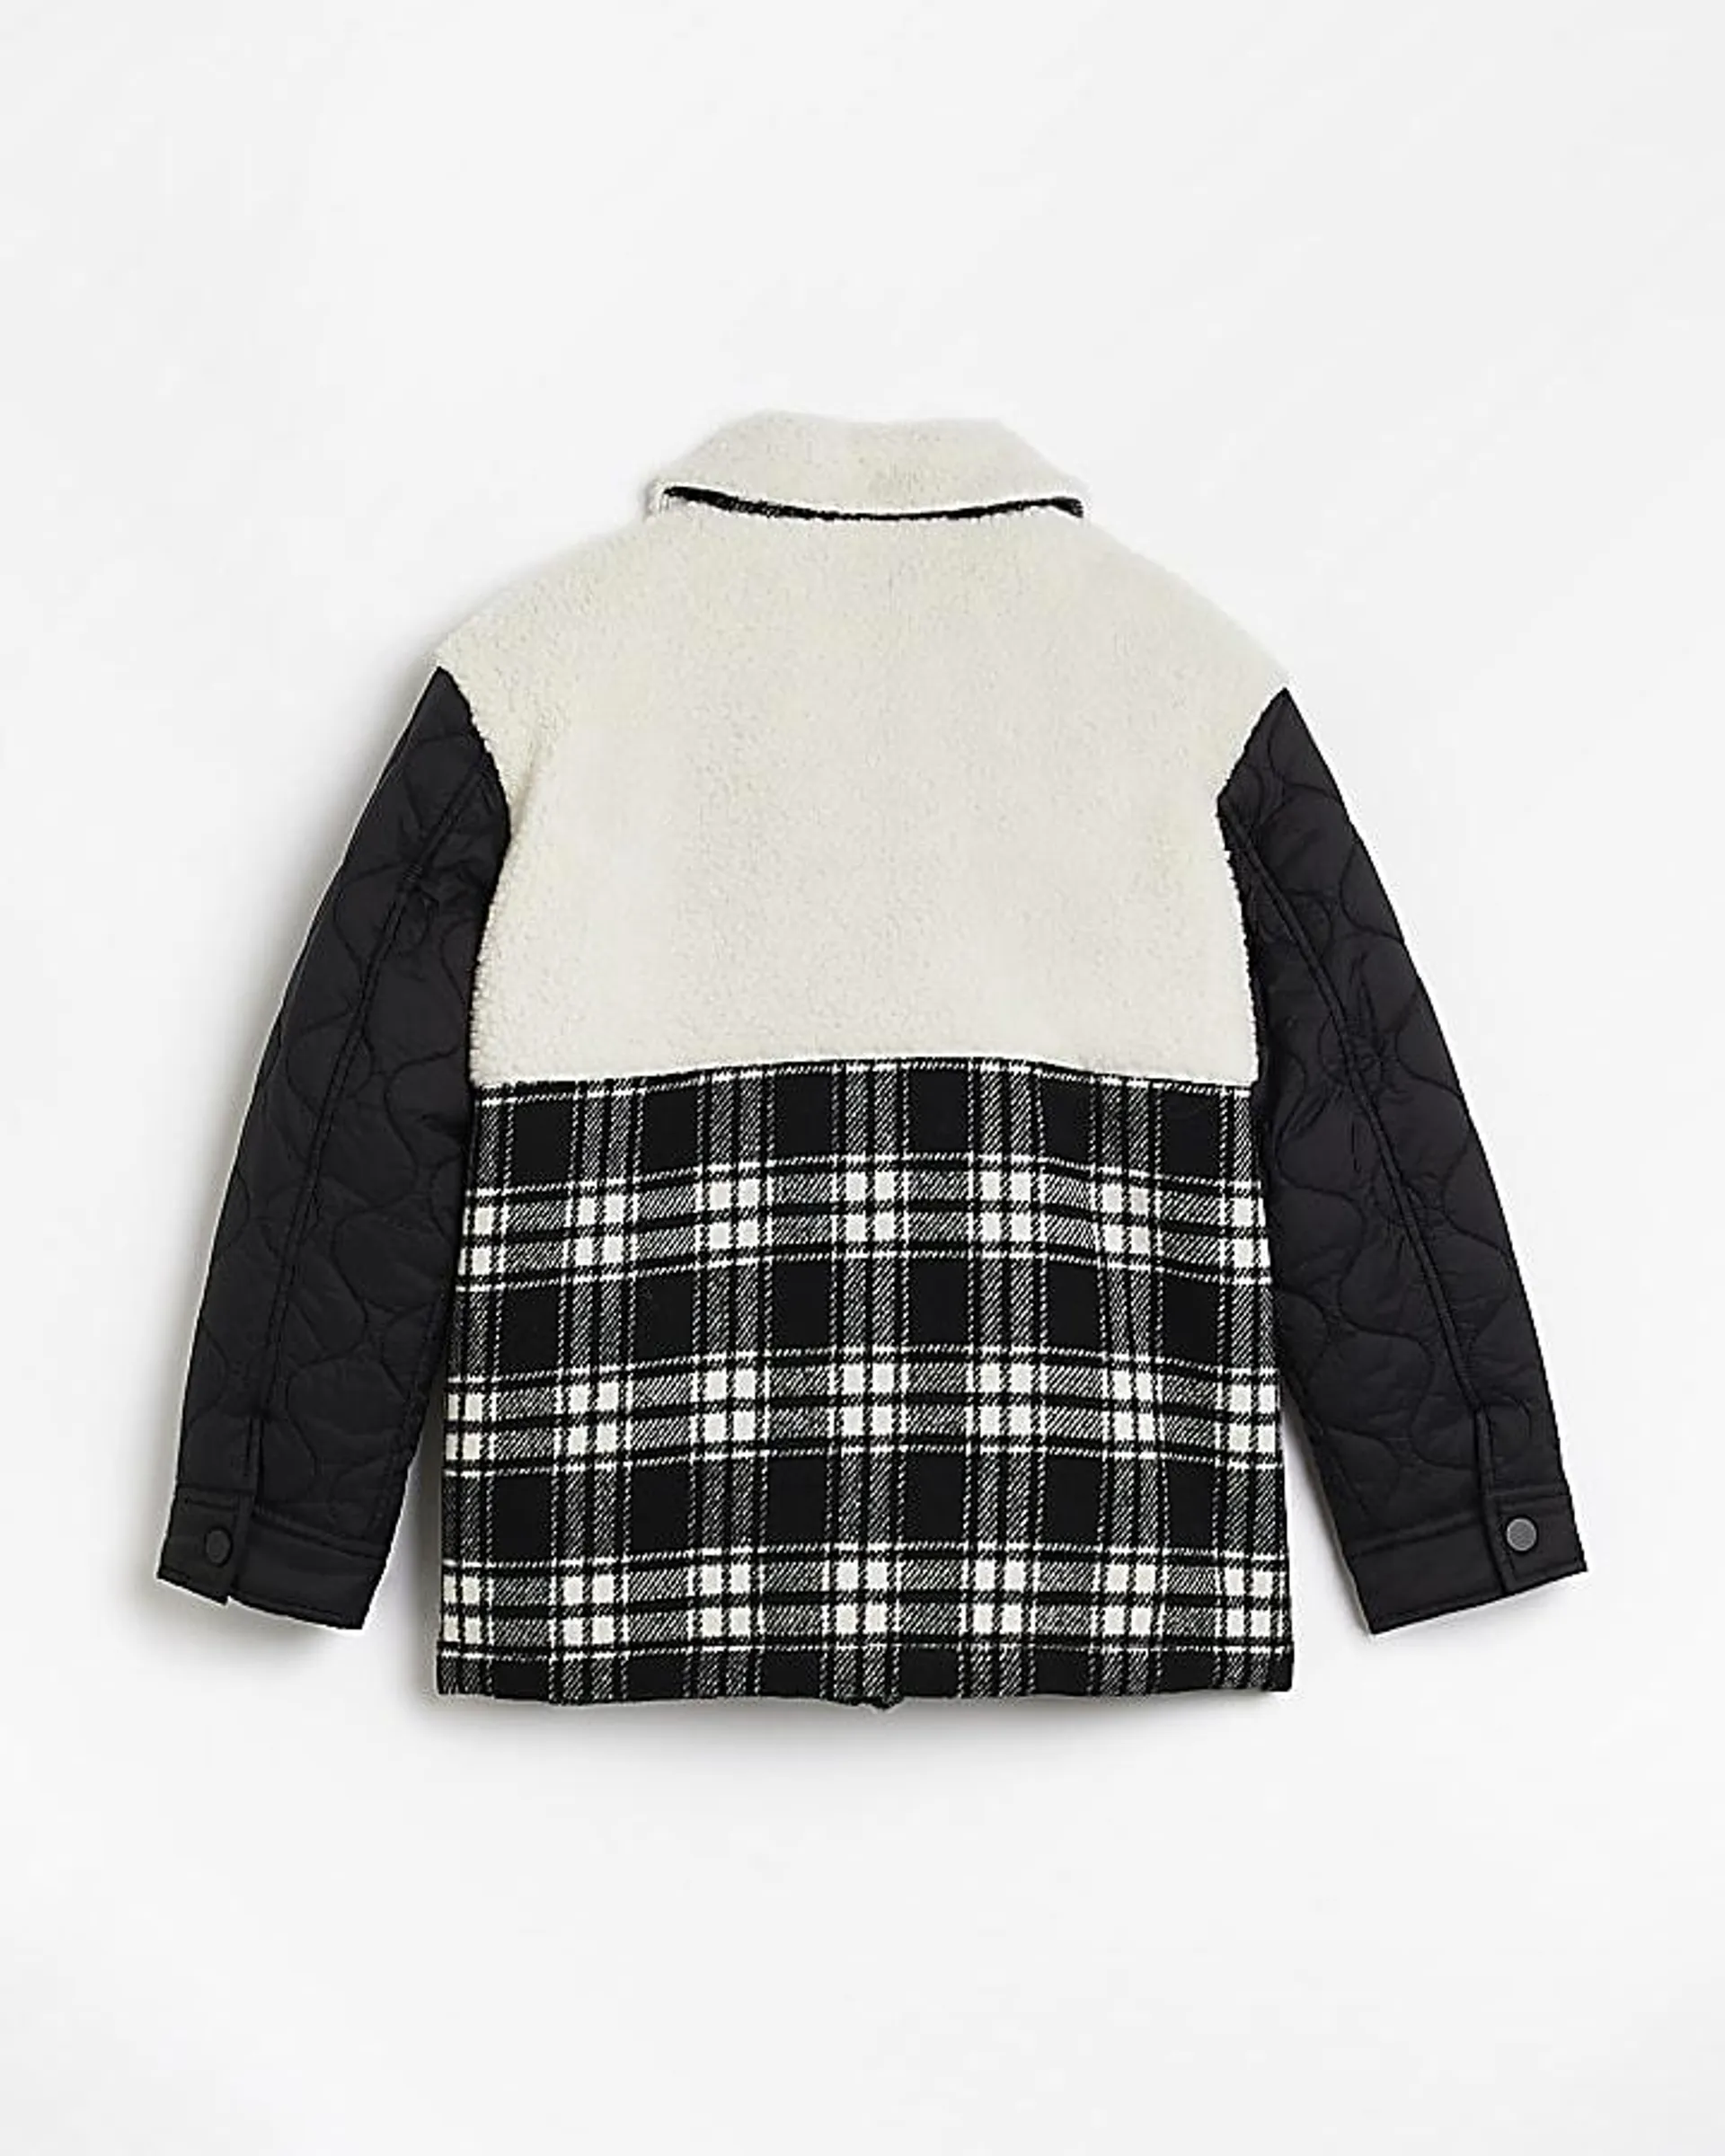 Boys Black Quilted Check Borg SHACKET